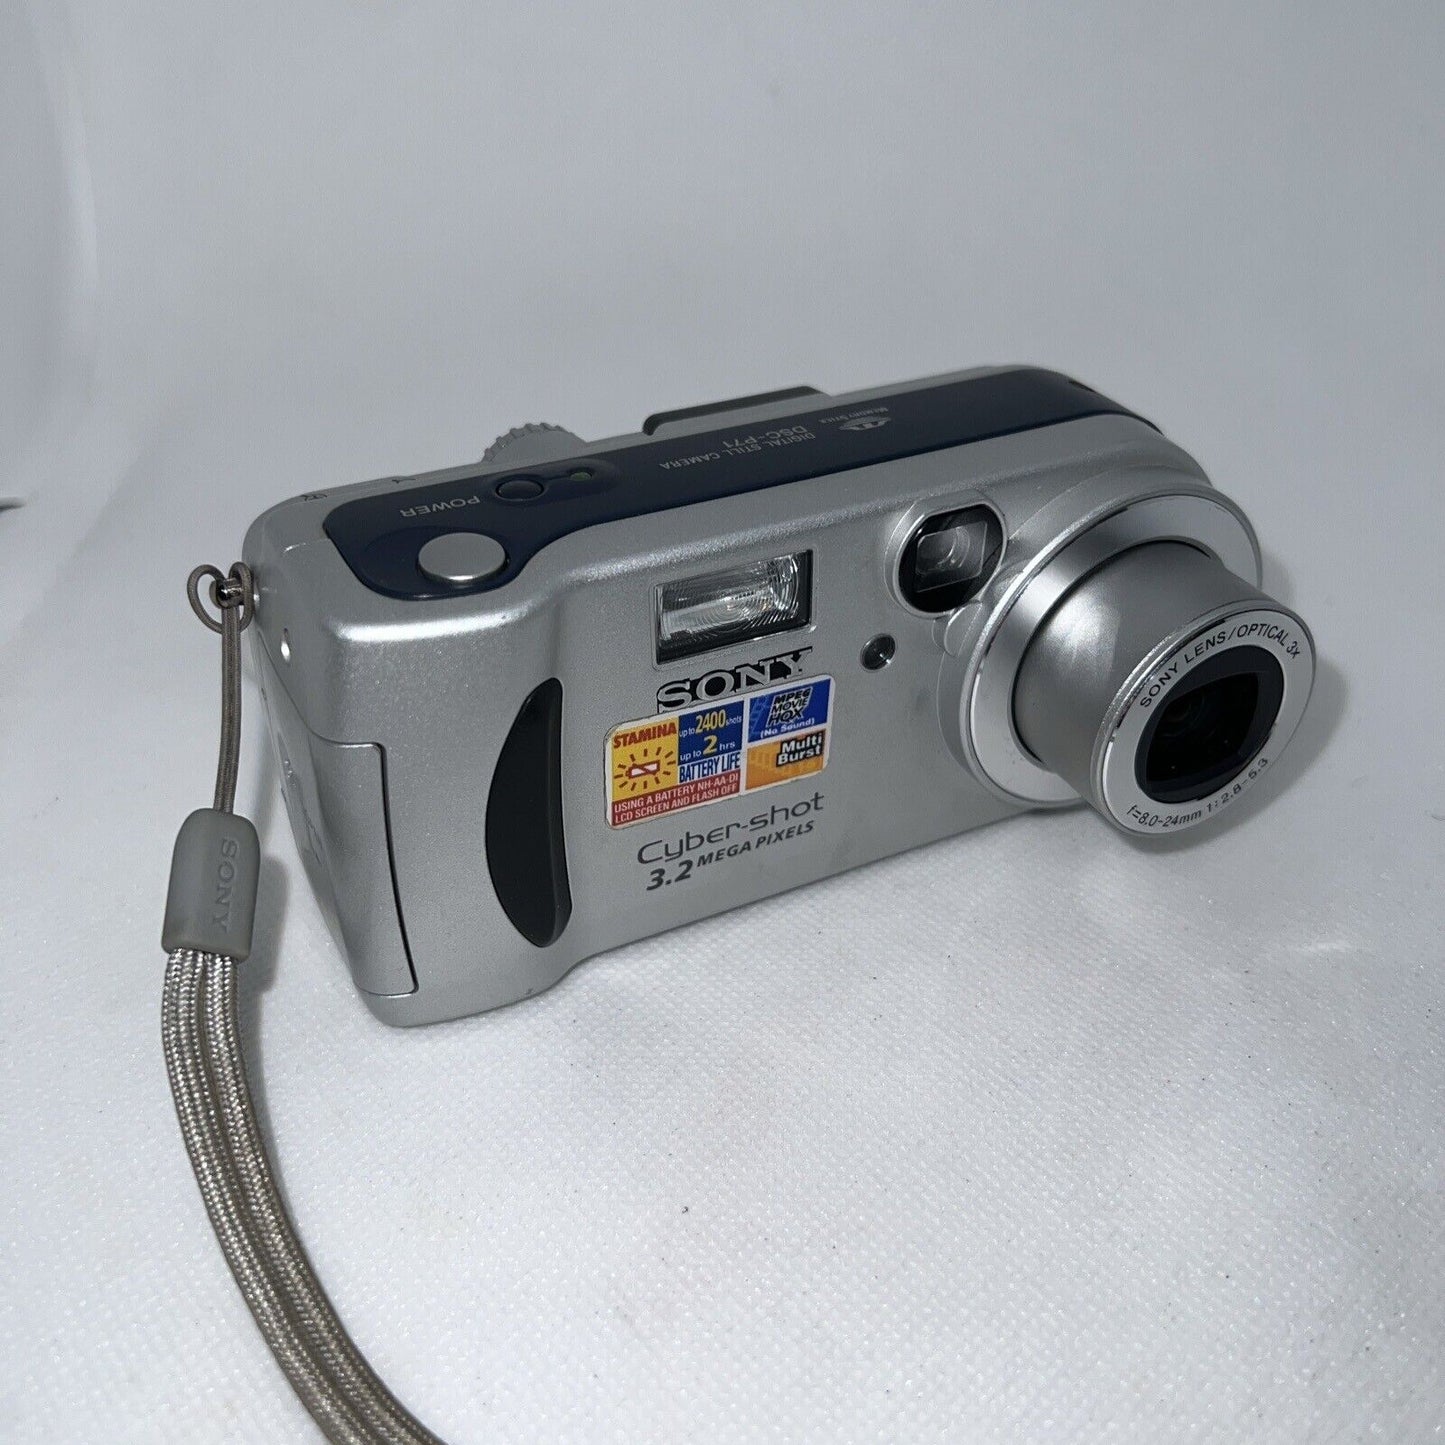 Vintage Sony Digital Camera Cyber-shot DSC-P71 3.2 MP Tested + Accessories Sony